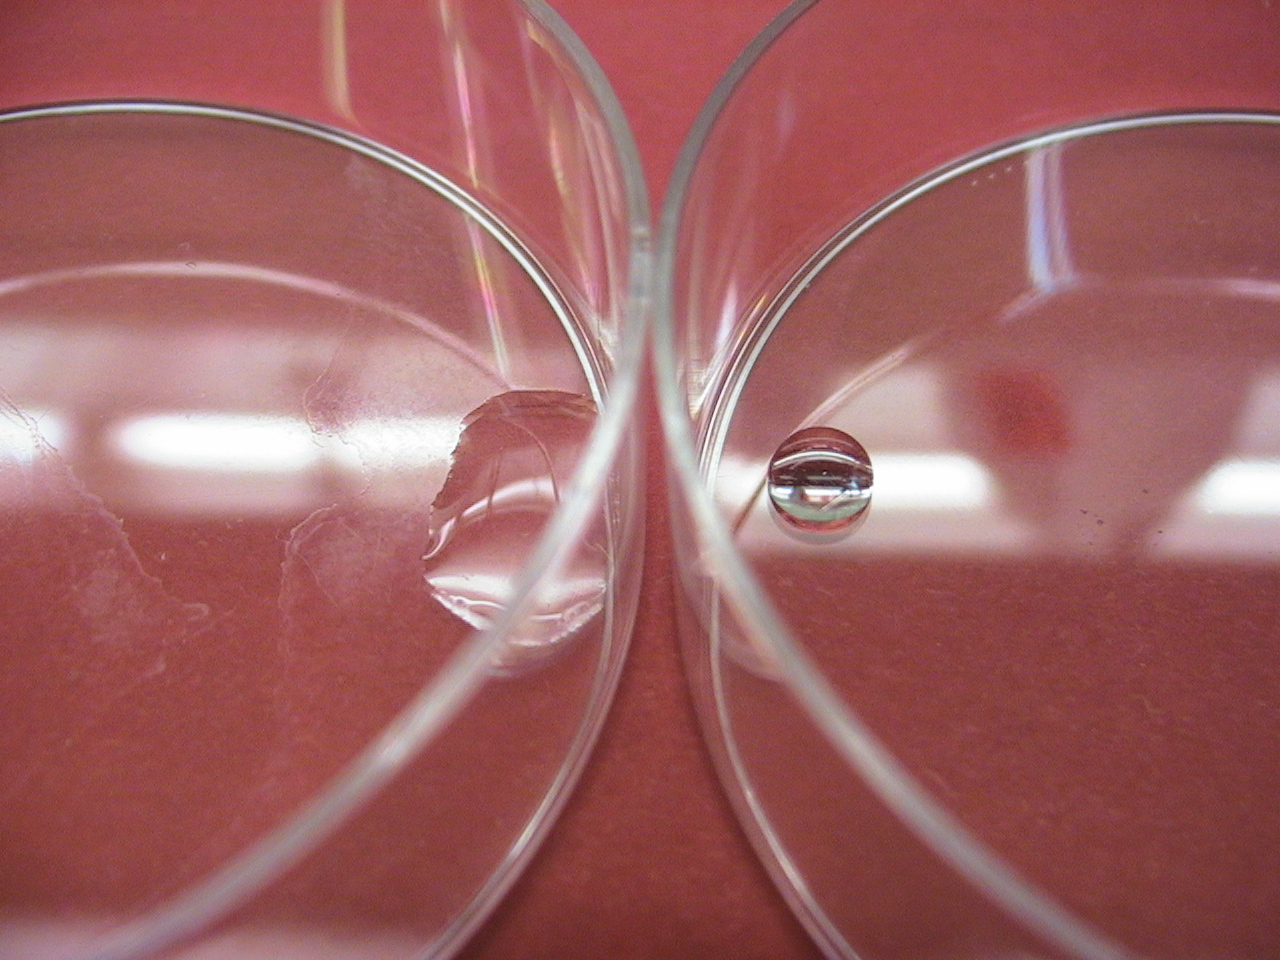 The normally hydrophobic surface of the petri dish on the left is made hydrophillic by coating it with purified chaplins.